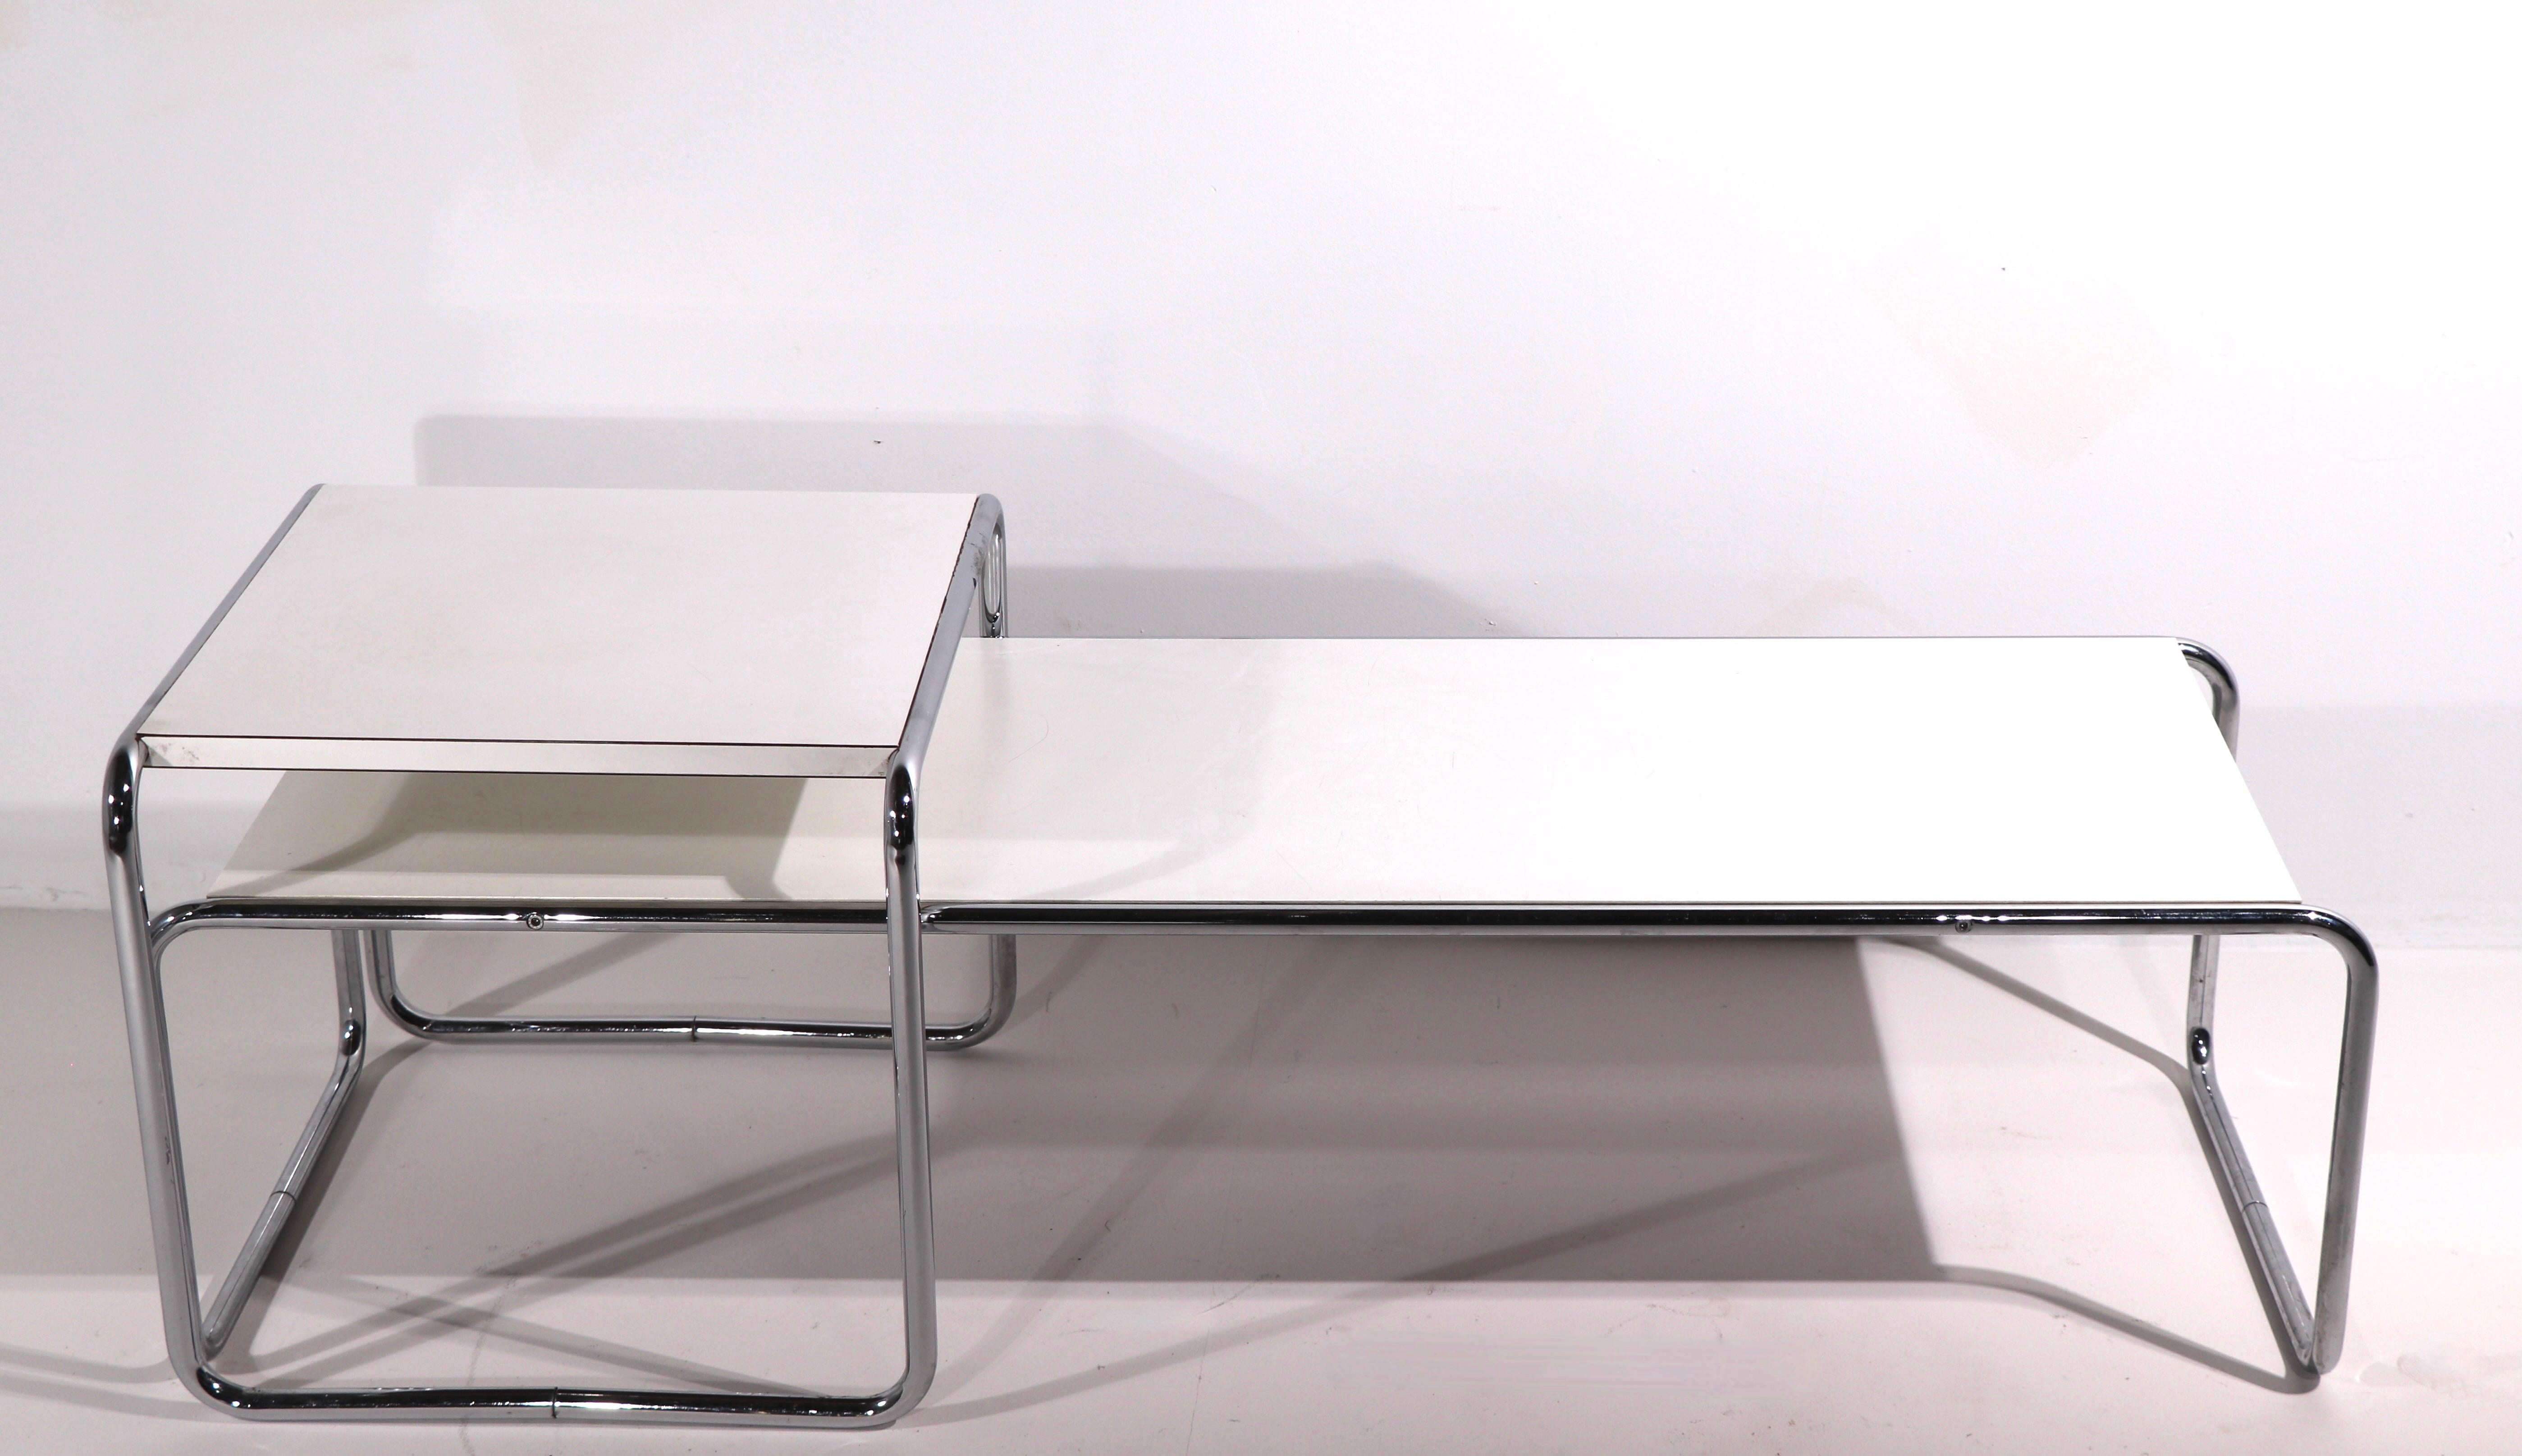 3 Breuer Designed Tables Made in Finland by Stendig 1 End Table 2 Coffee Tables For Sale 3